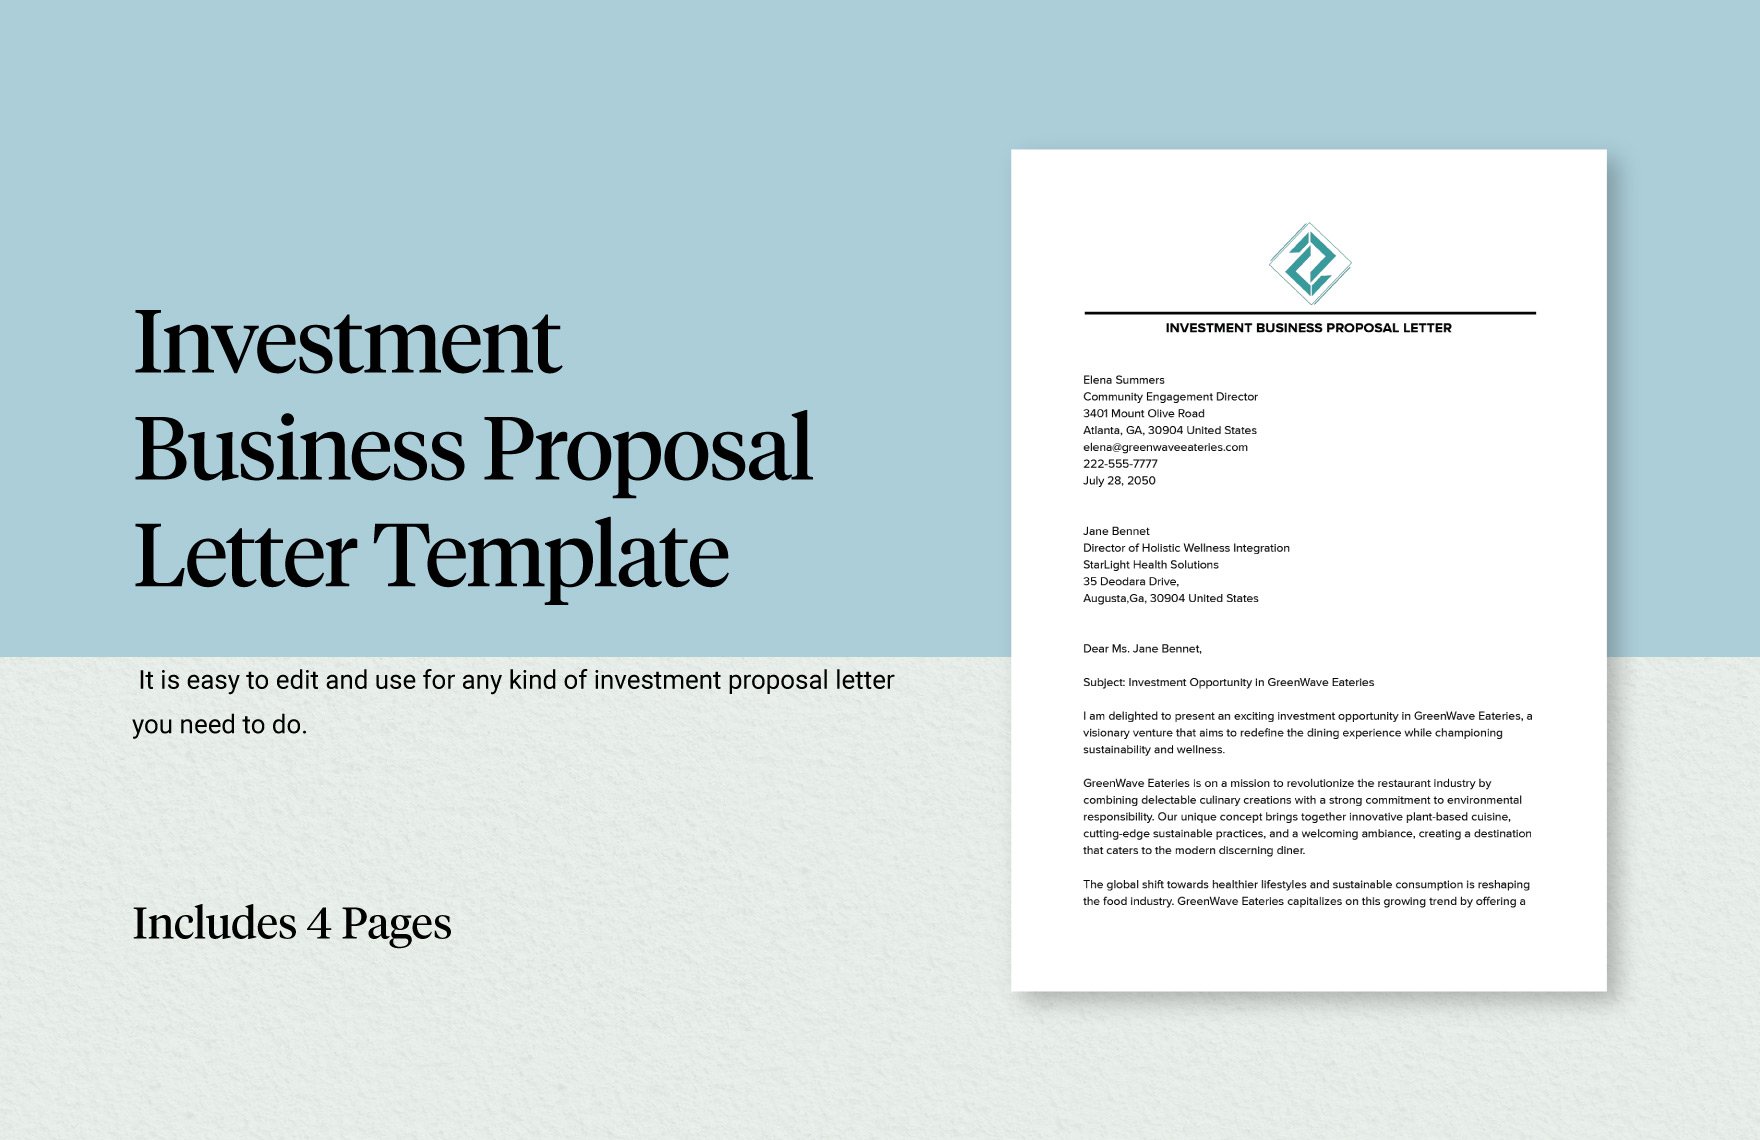 Investment Business Proposal Letter Template